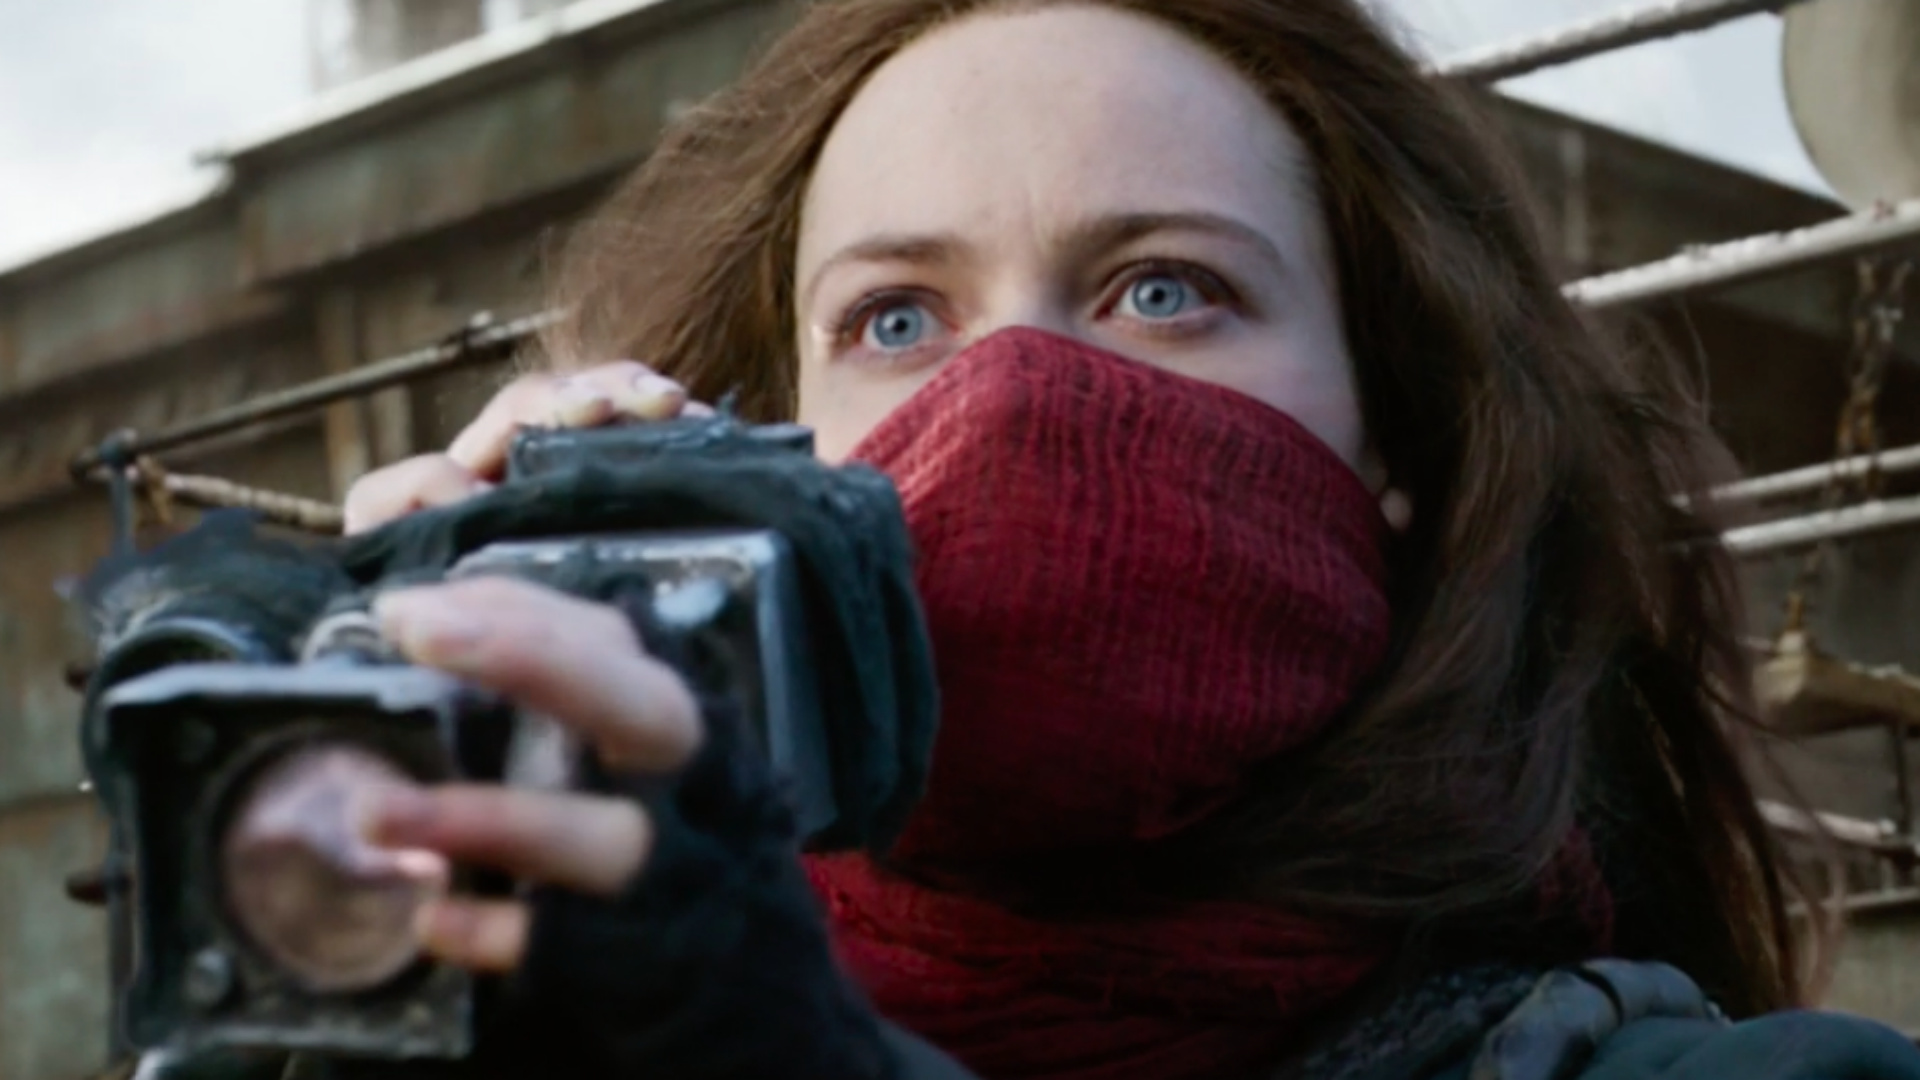 Mortal Engines ign, Post-apocalyptic world, Steampunk aesthetic, Action-packed, 1920x1080 Full HD Desktop